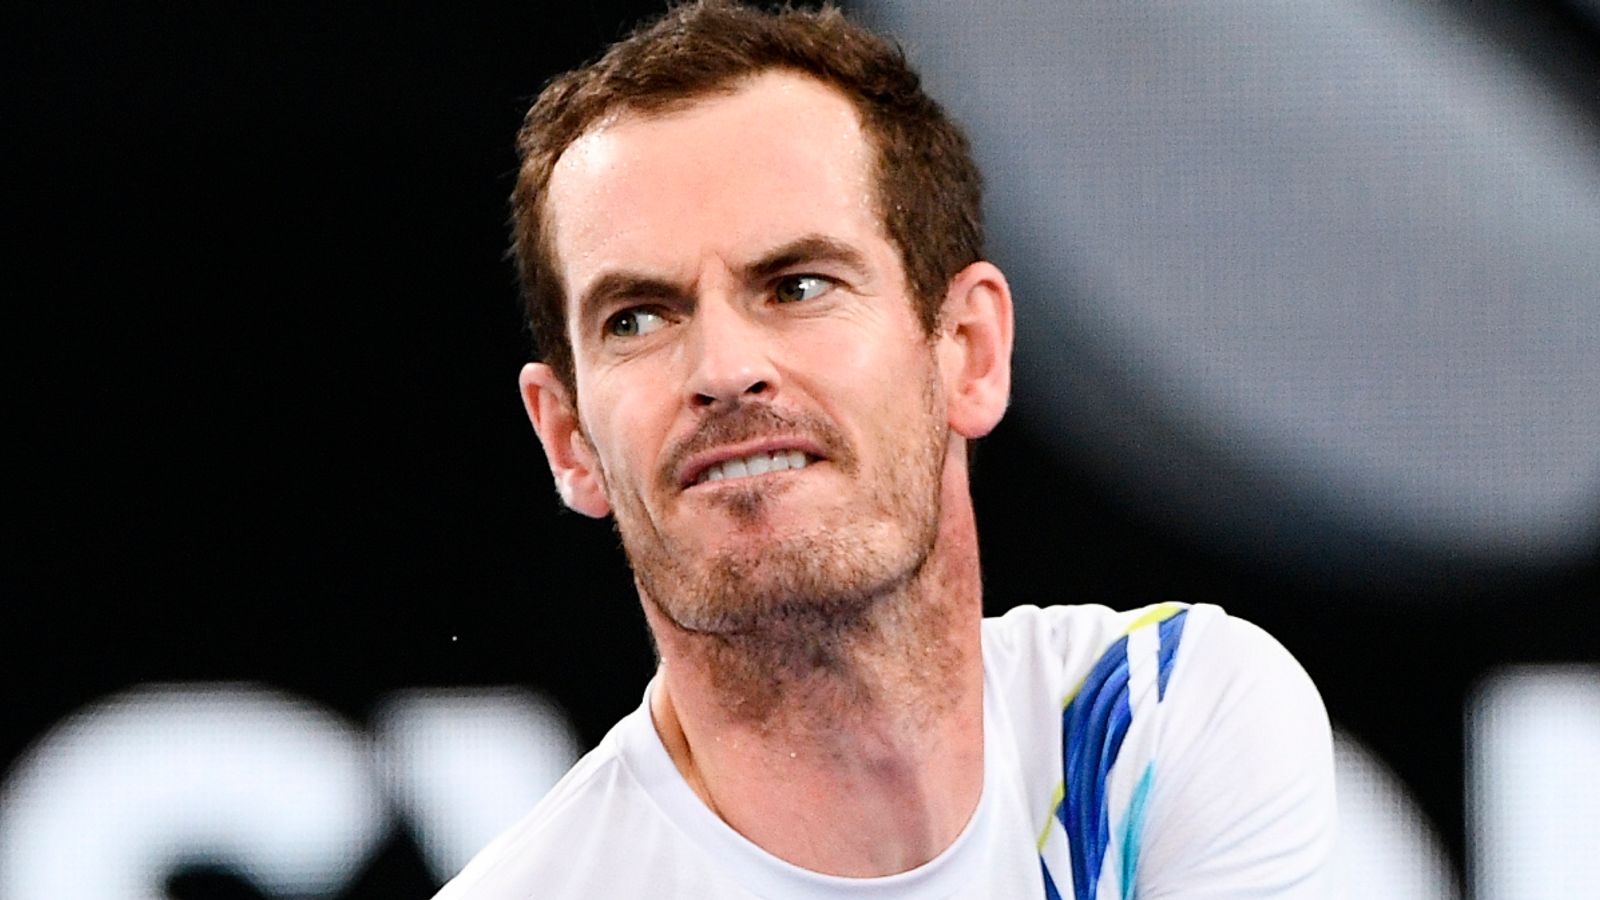 Andy Murray turned down seven-figure fee to play exhibition matches in Saudi Arabia, says his agent